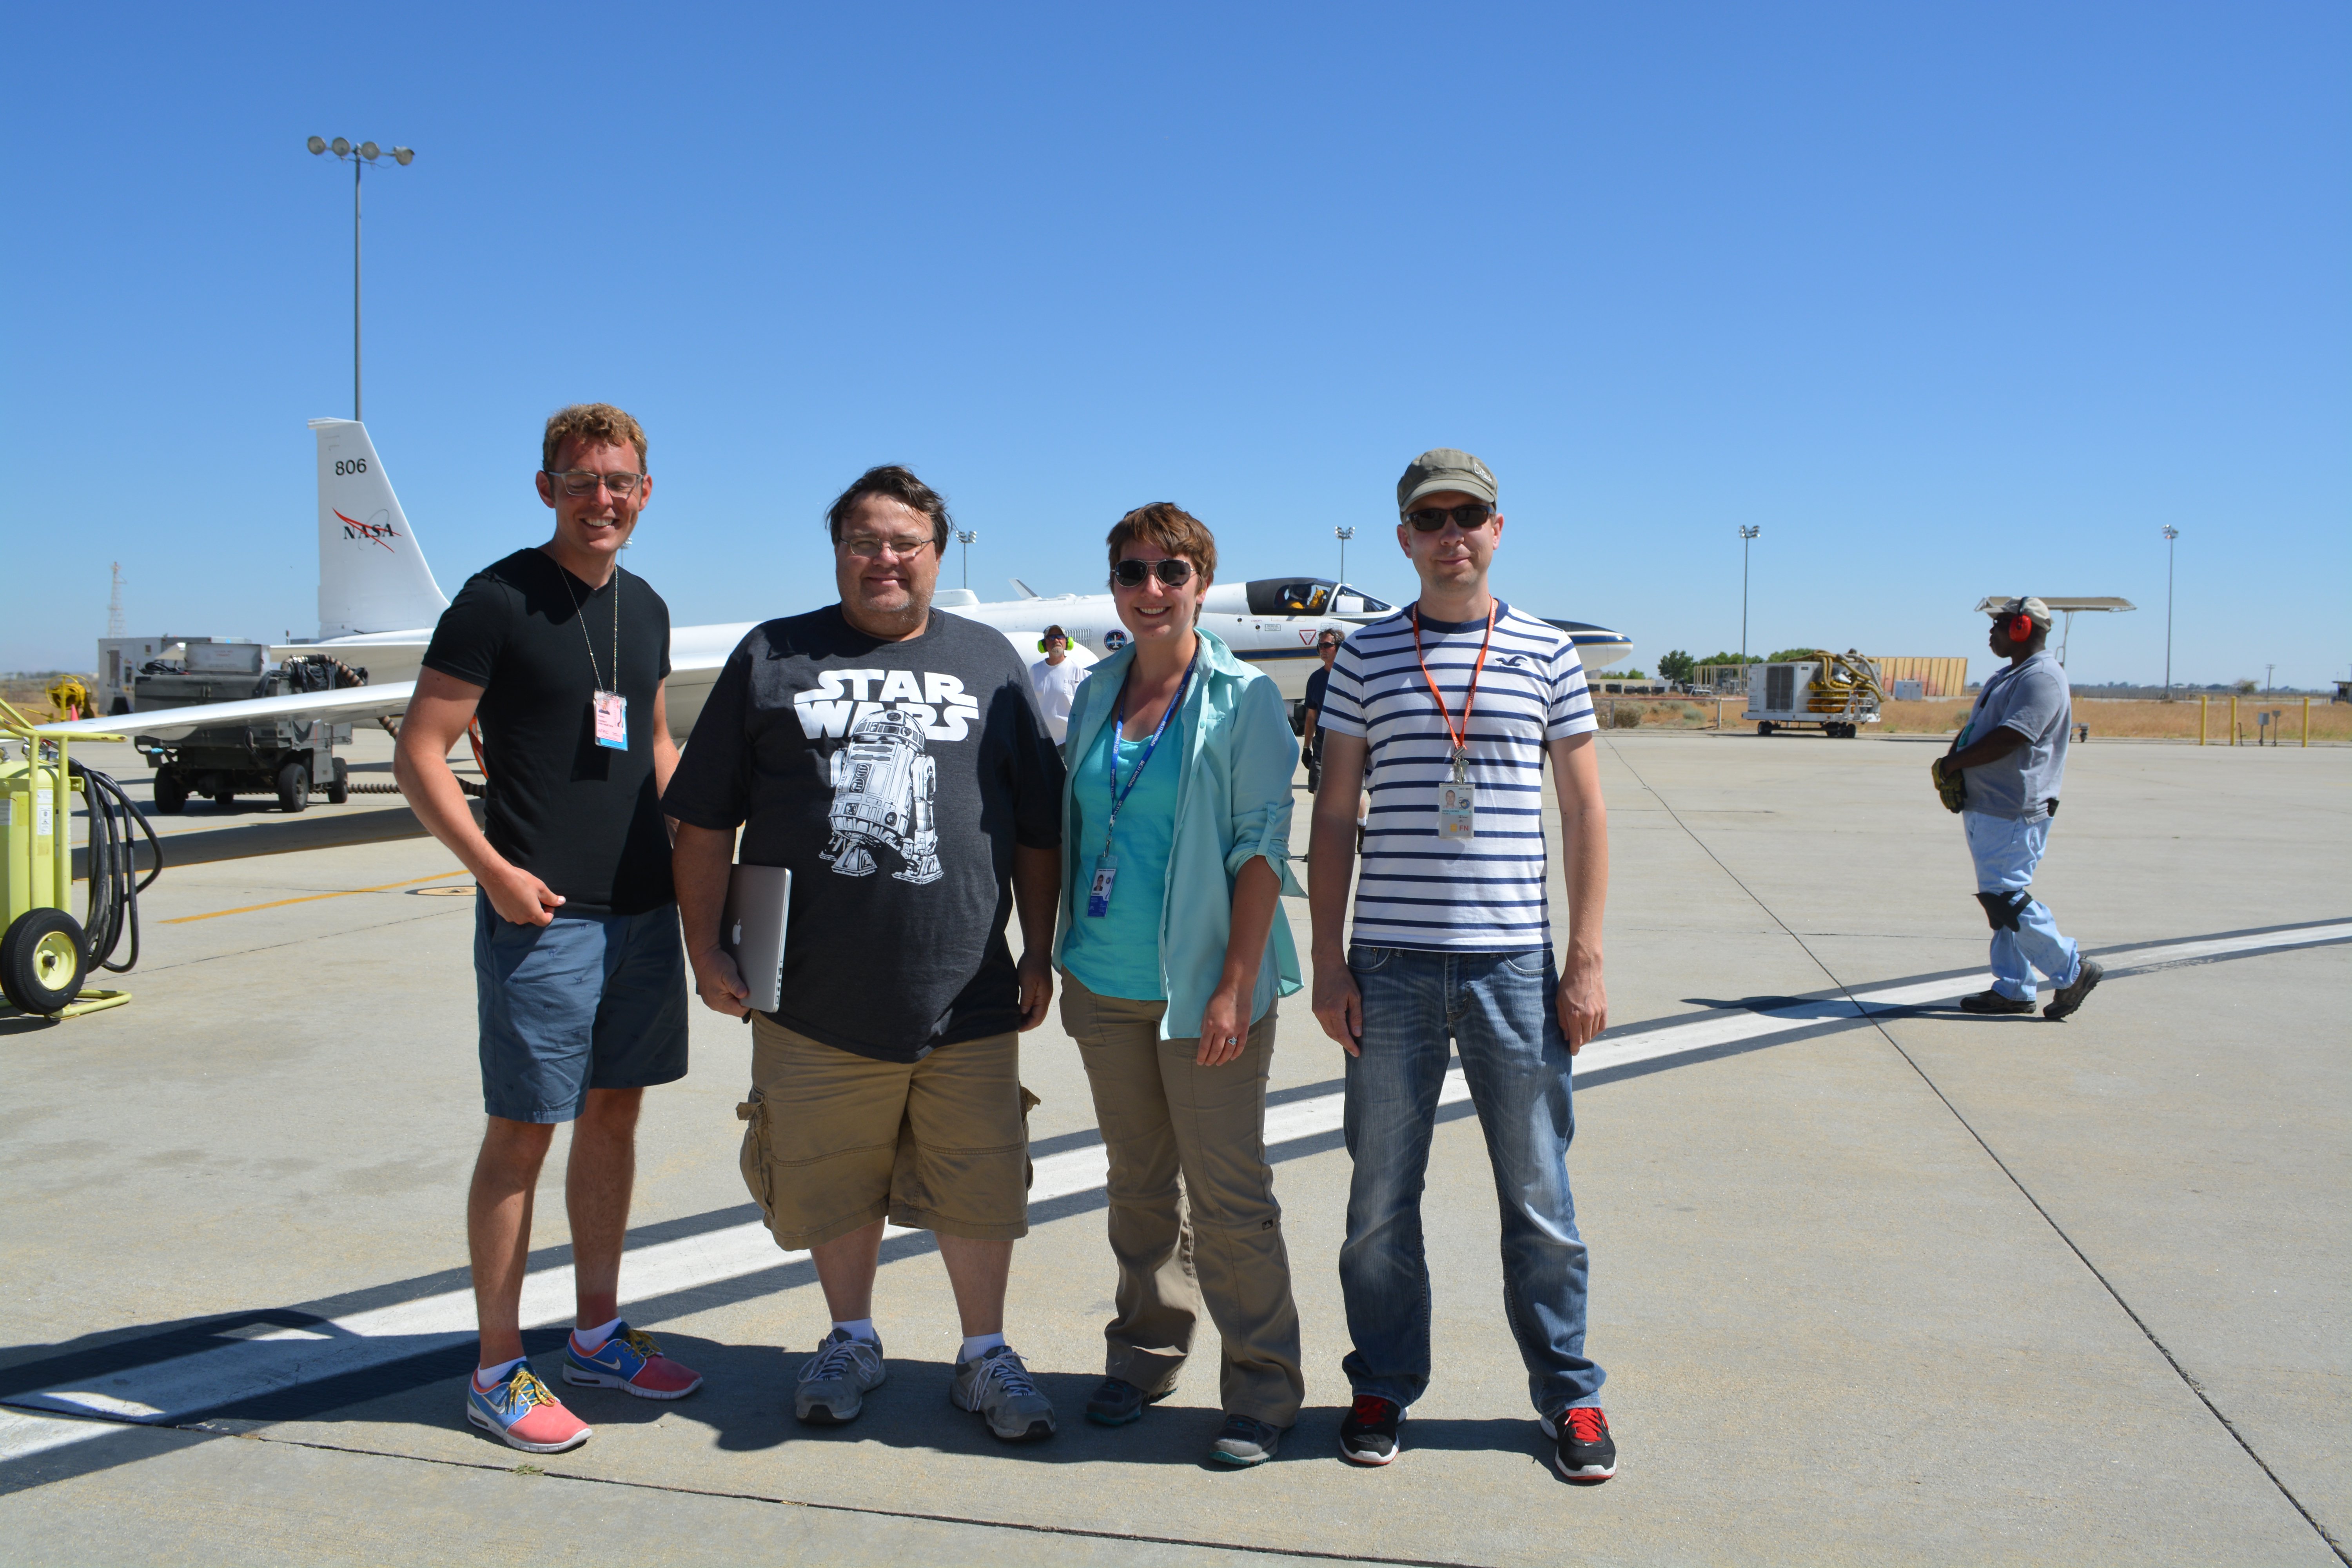 An image of four people standing on the apron outside a hangar at Armstrong Flight Research Center. In the background are several other people wearing ear protection and the NASA ER-2 aircraft parked on the apron with the pilot in a flight suit and helmet visible in the cockpit. It is a warm sunny day with a completely blue sky.